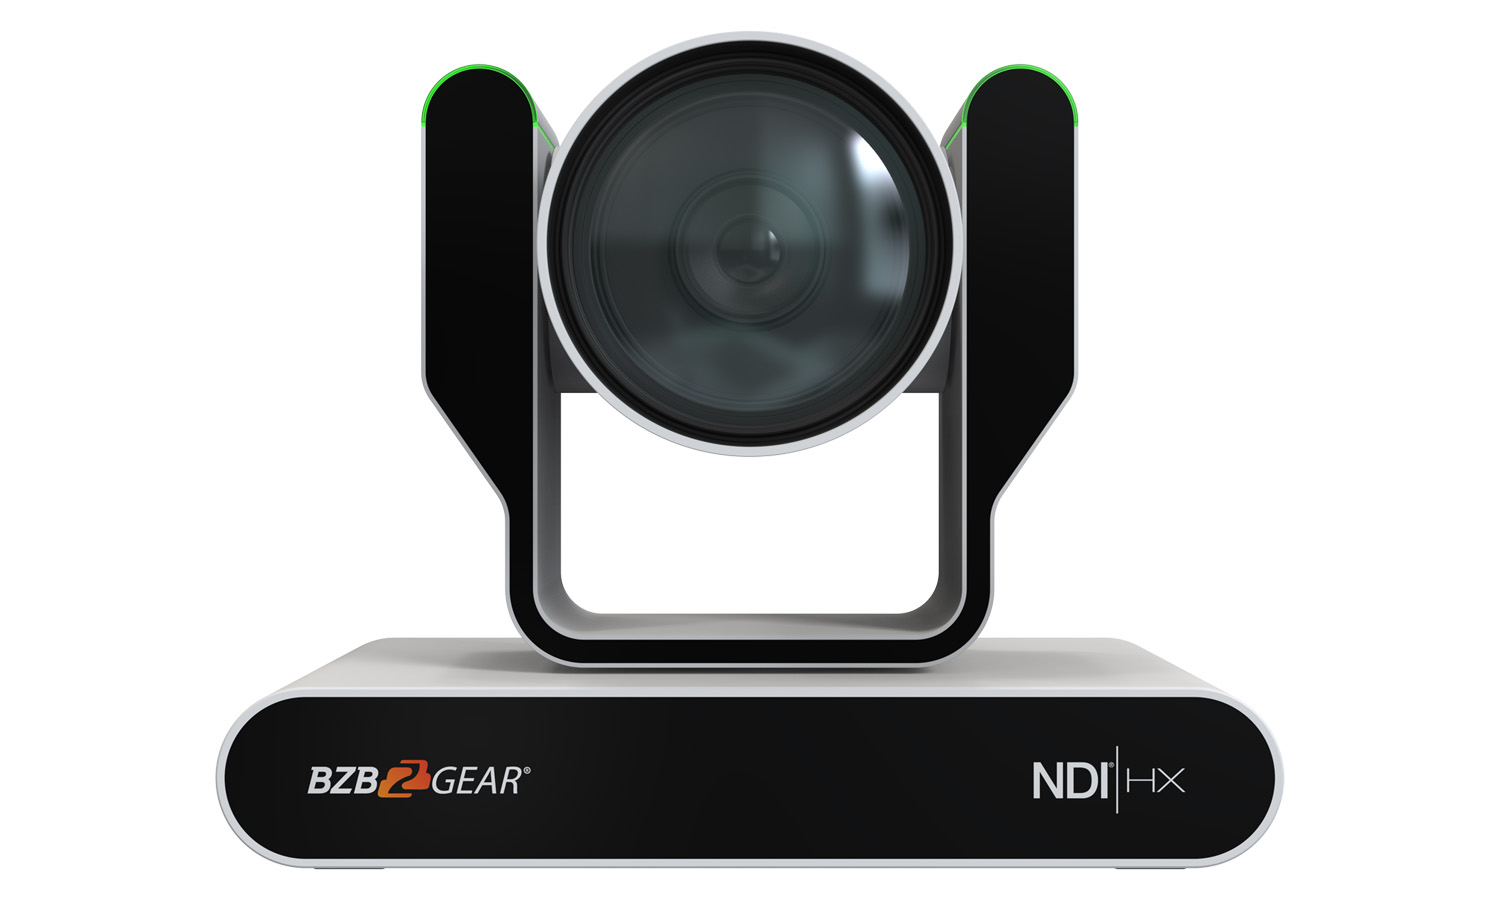 BG-ADAMO-4KND12X-W 12X 4K@60Hz HDMI2.0/12G-SDI/USB 2.0/USB 3.0/NDI|HX Live Streaming PTZ Camera with Tally Lights (White) by BZBGEAR